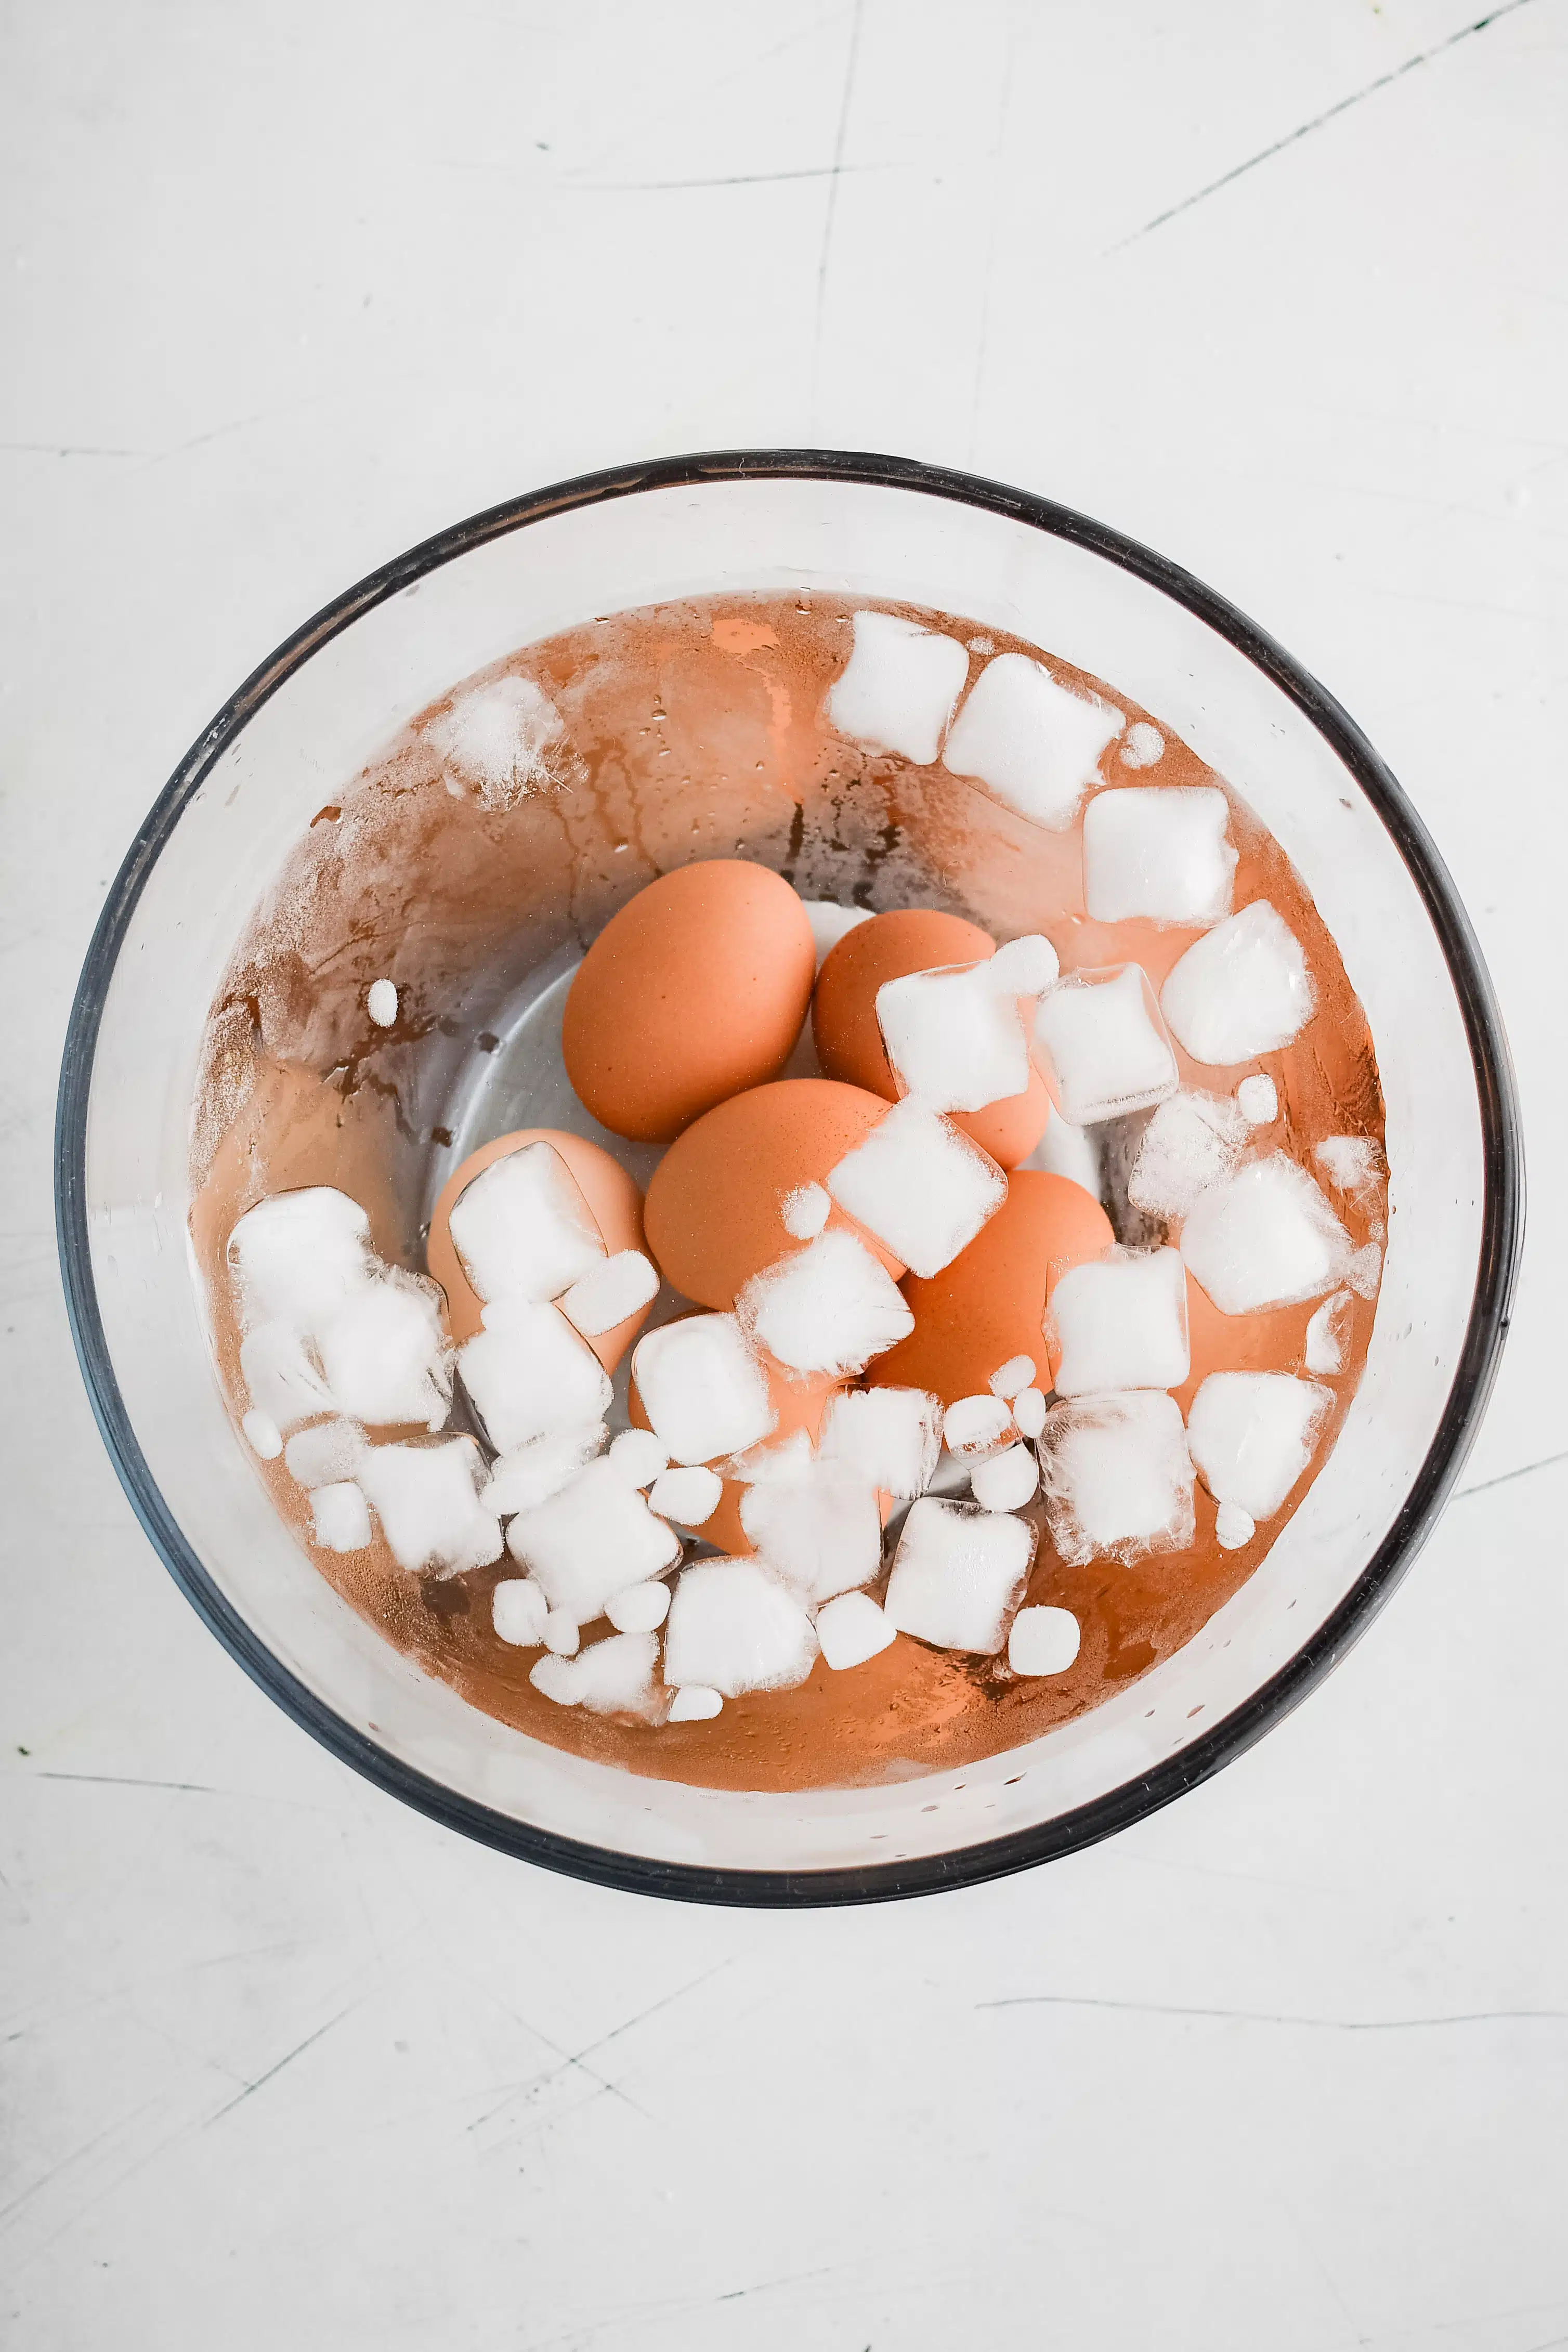 Ice water bath filled with hard-boiled eggs.